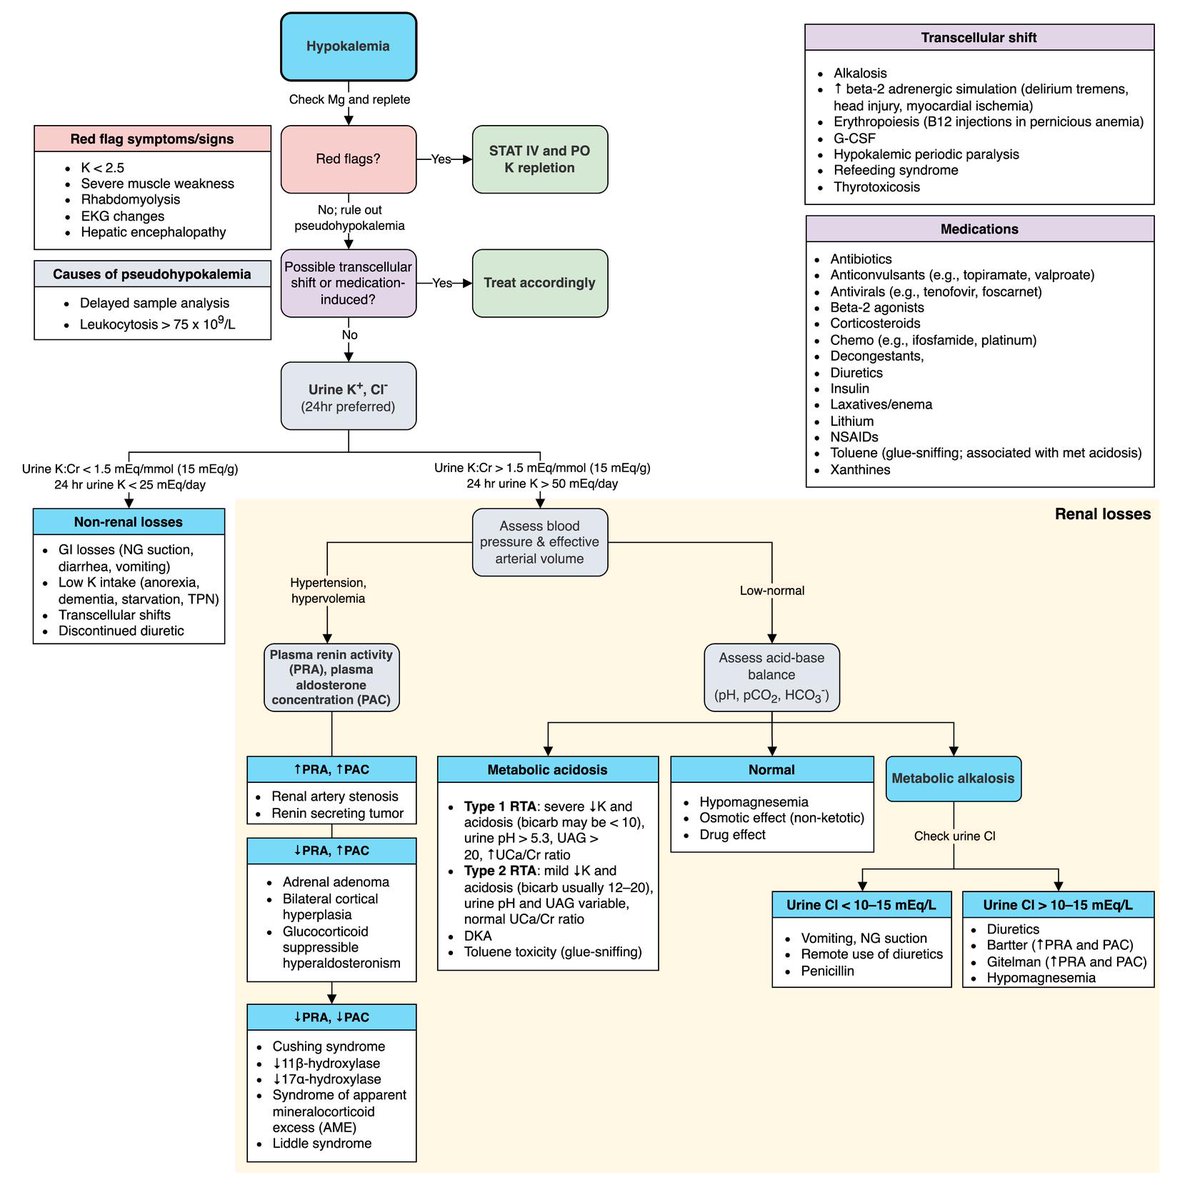 Hypokalemia - Diagnosis Algorithm

by @MatthewHoMD 
#medtwitter #foamed #meded